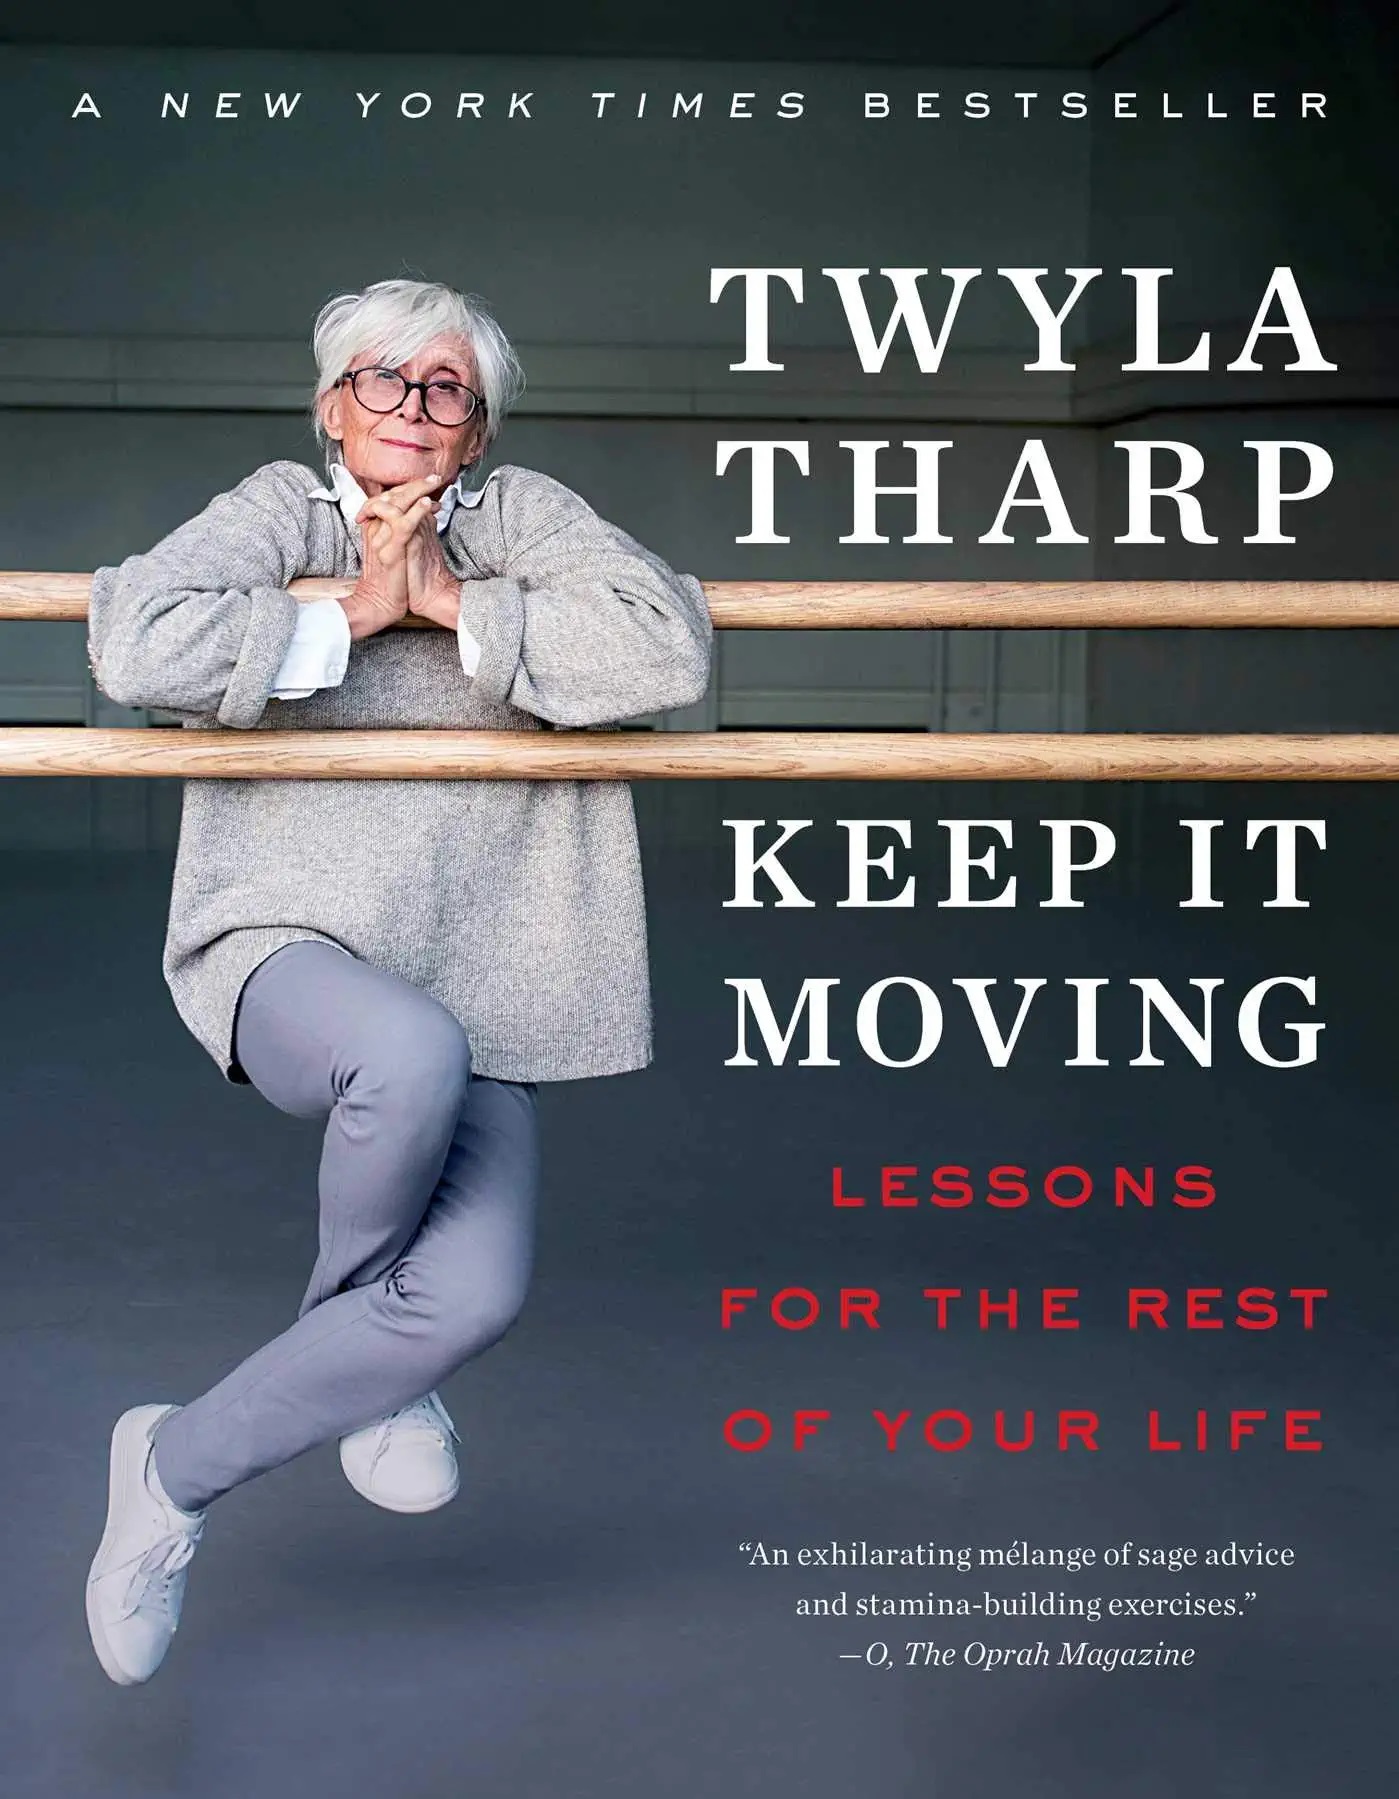 Affiliate link to Amazon information on Keep it moving by Twyla Tharp